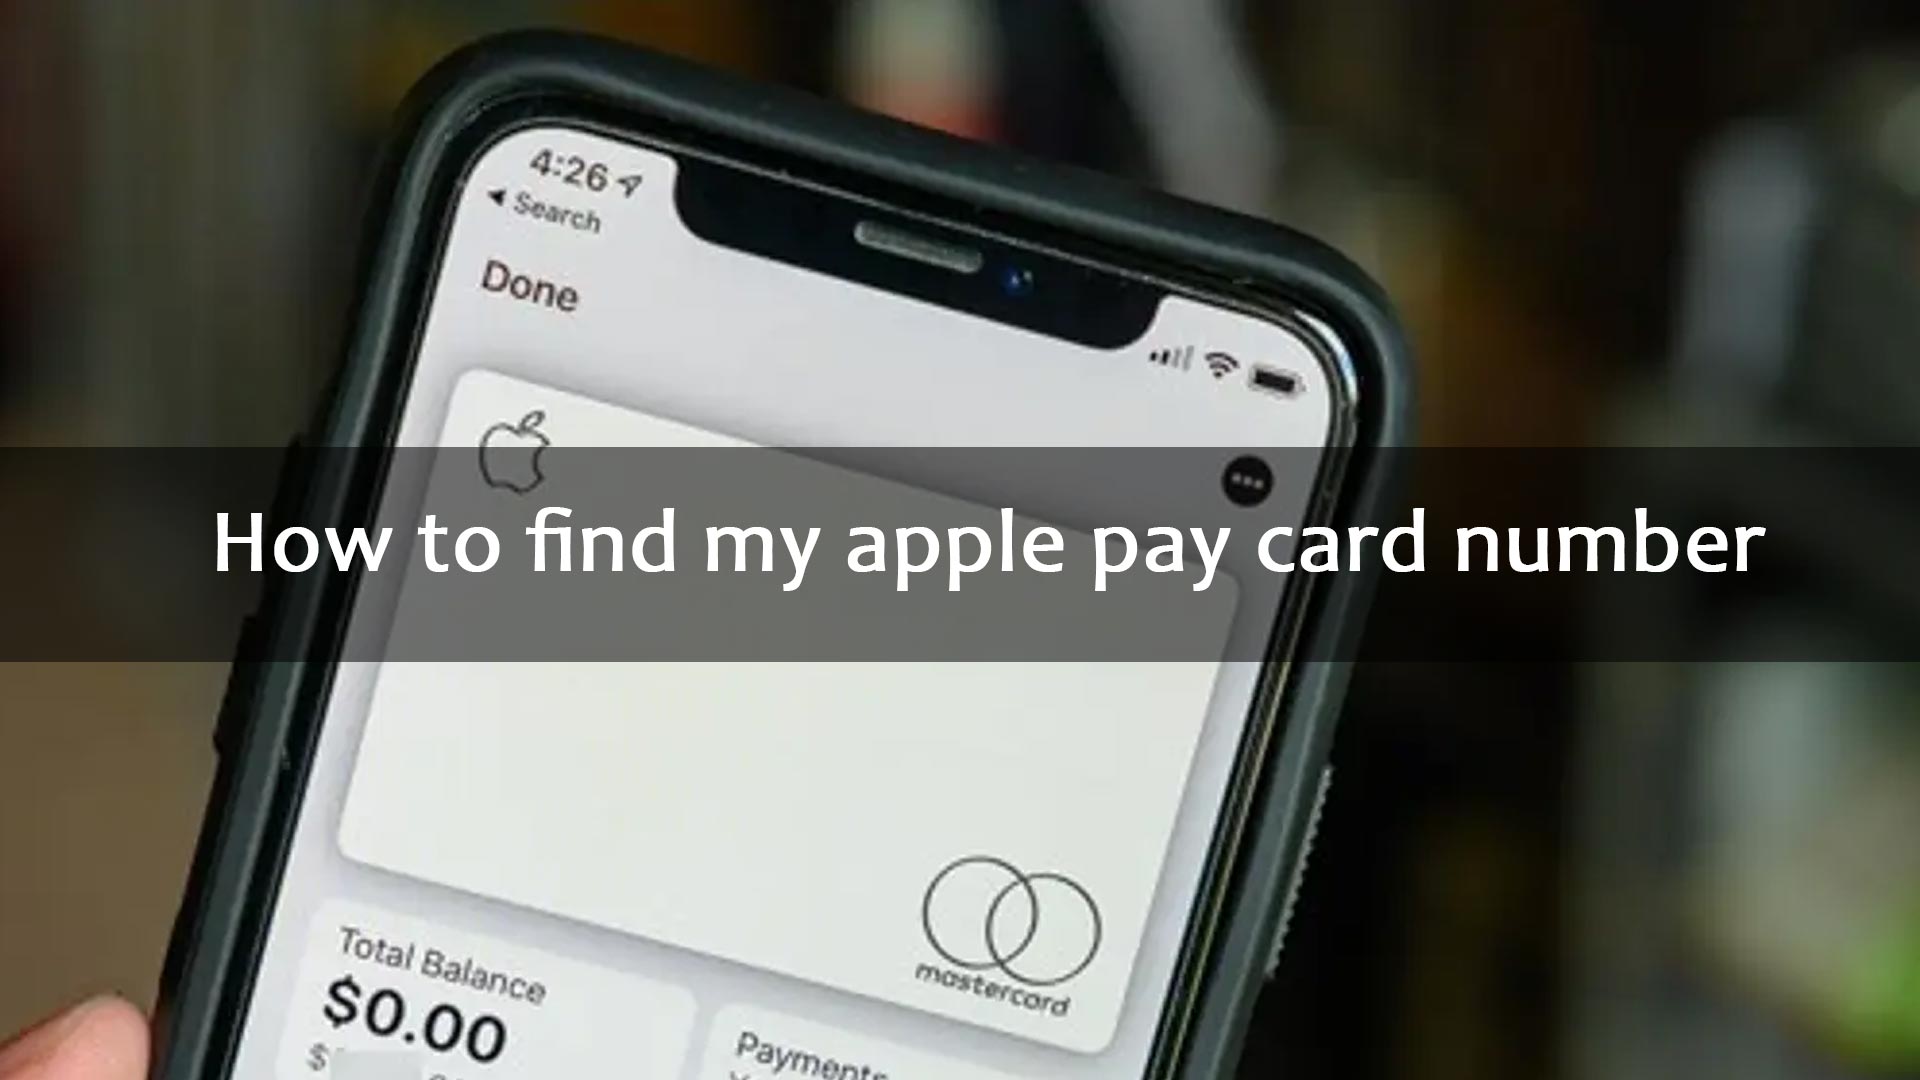 How to find my apple pay card number